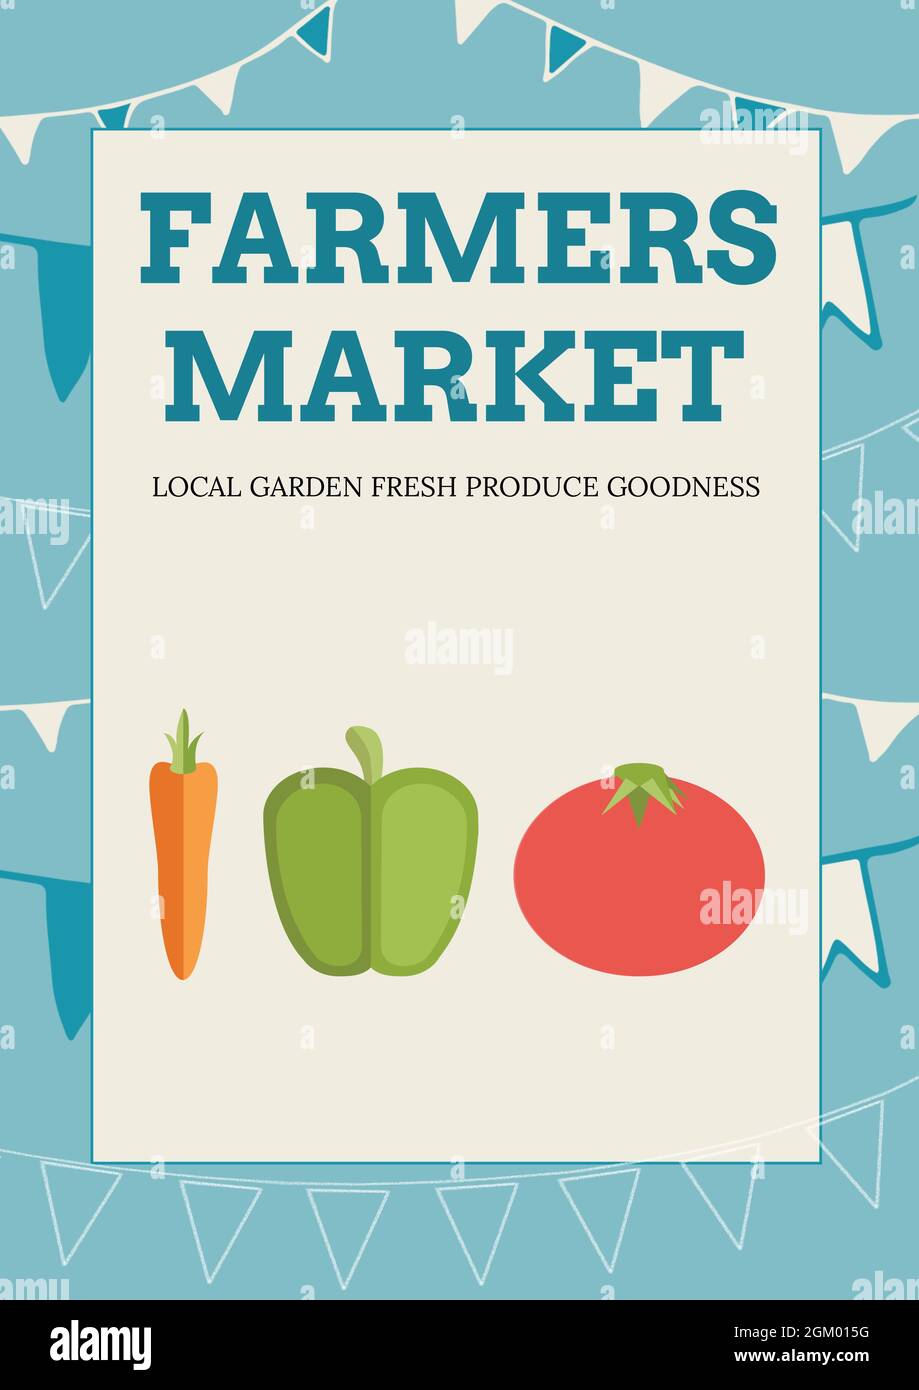 Farmers market text with multiple vegetable icons against blue background Stock Photo